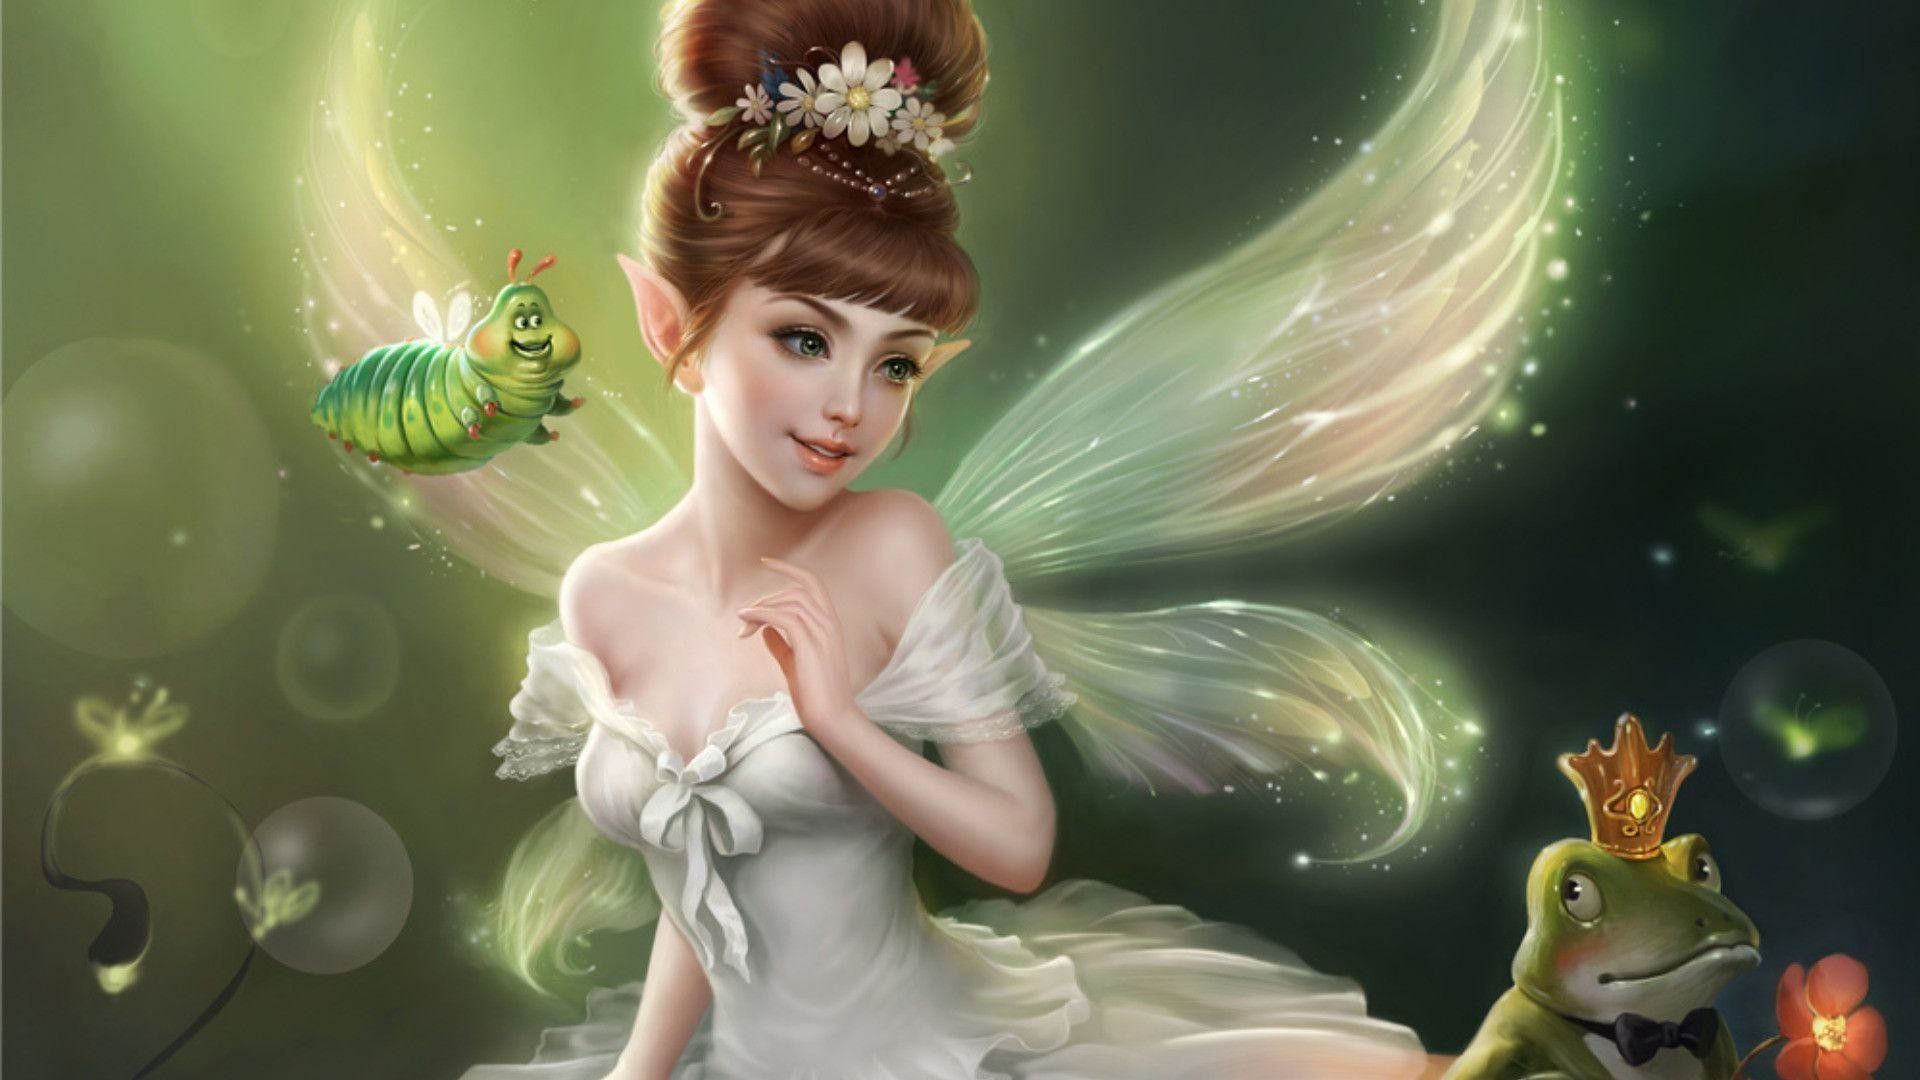 30 Fairy Wallpapers for a Fairycore-Inspired Phone Screen - The Mood Guide